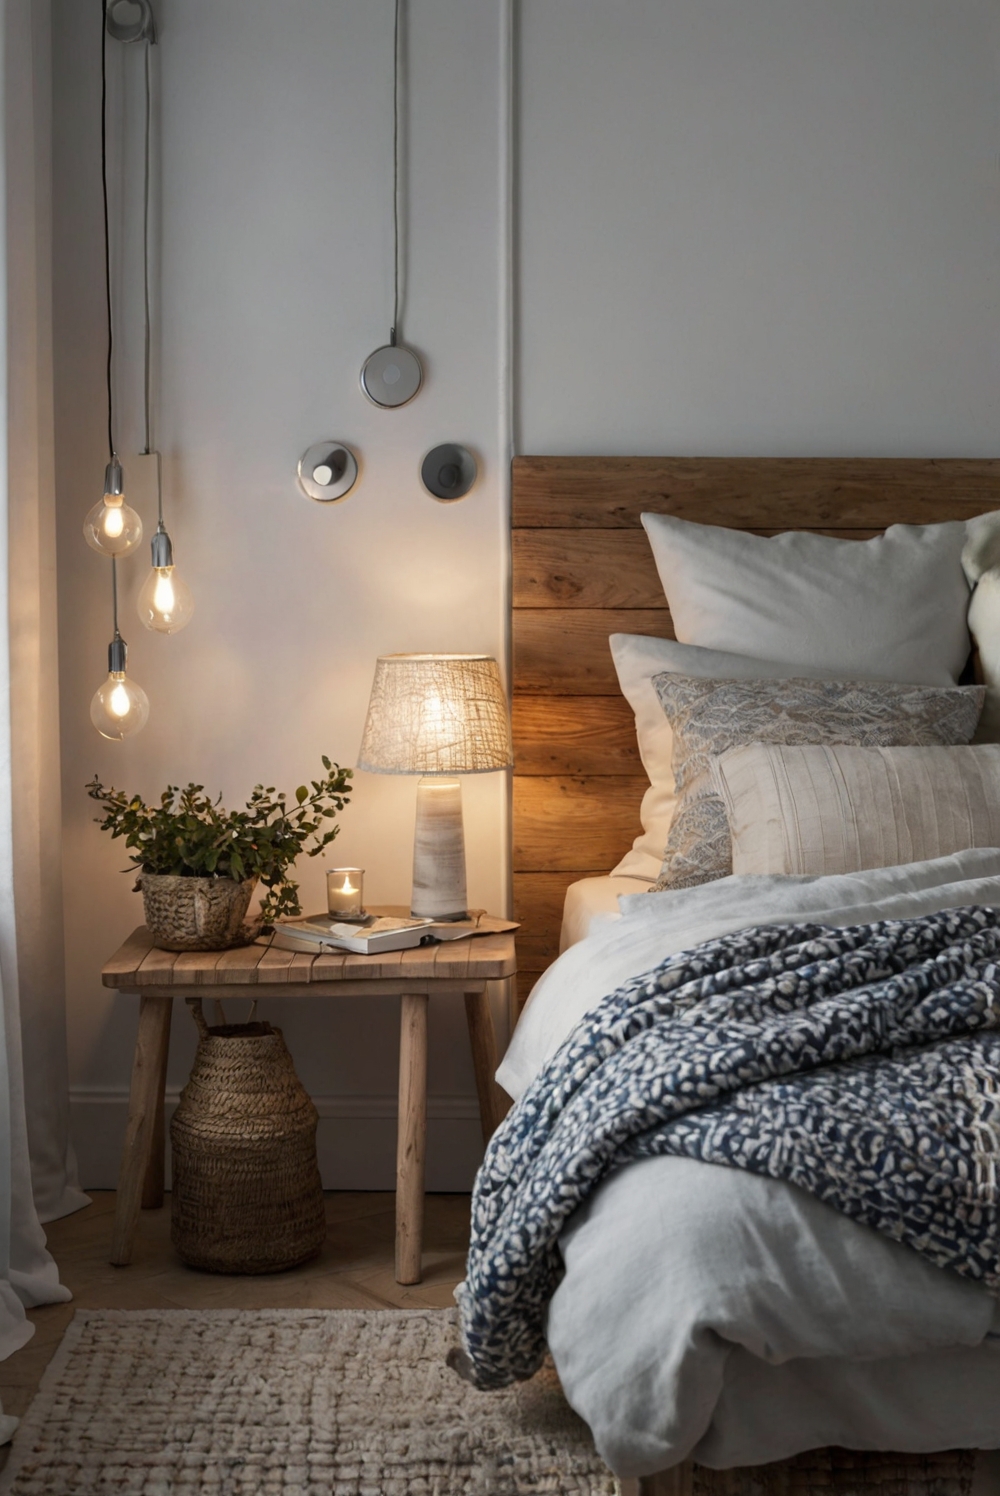 What are the advantages of wall-mounted reading lights for your bed?